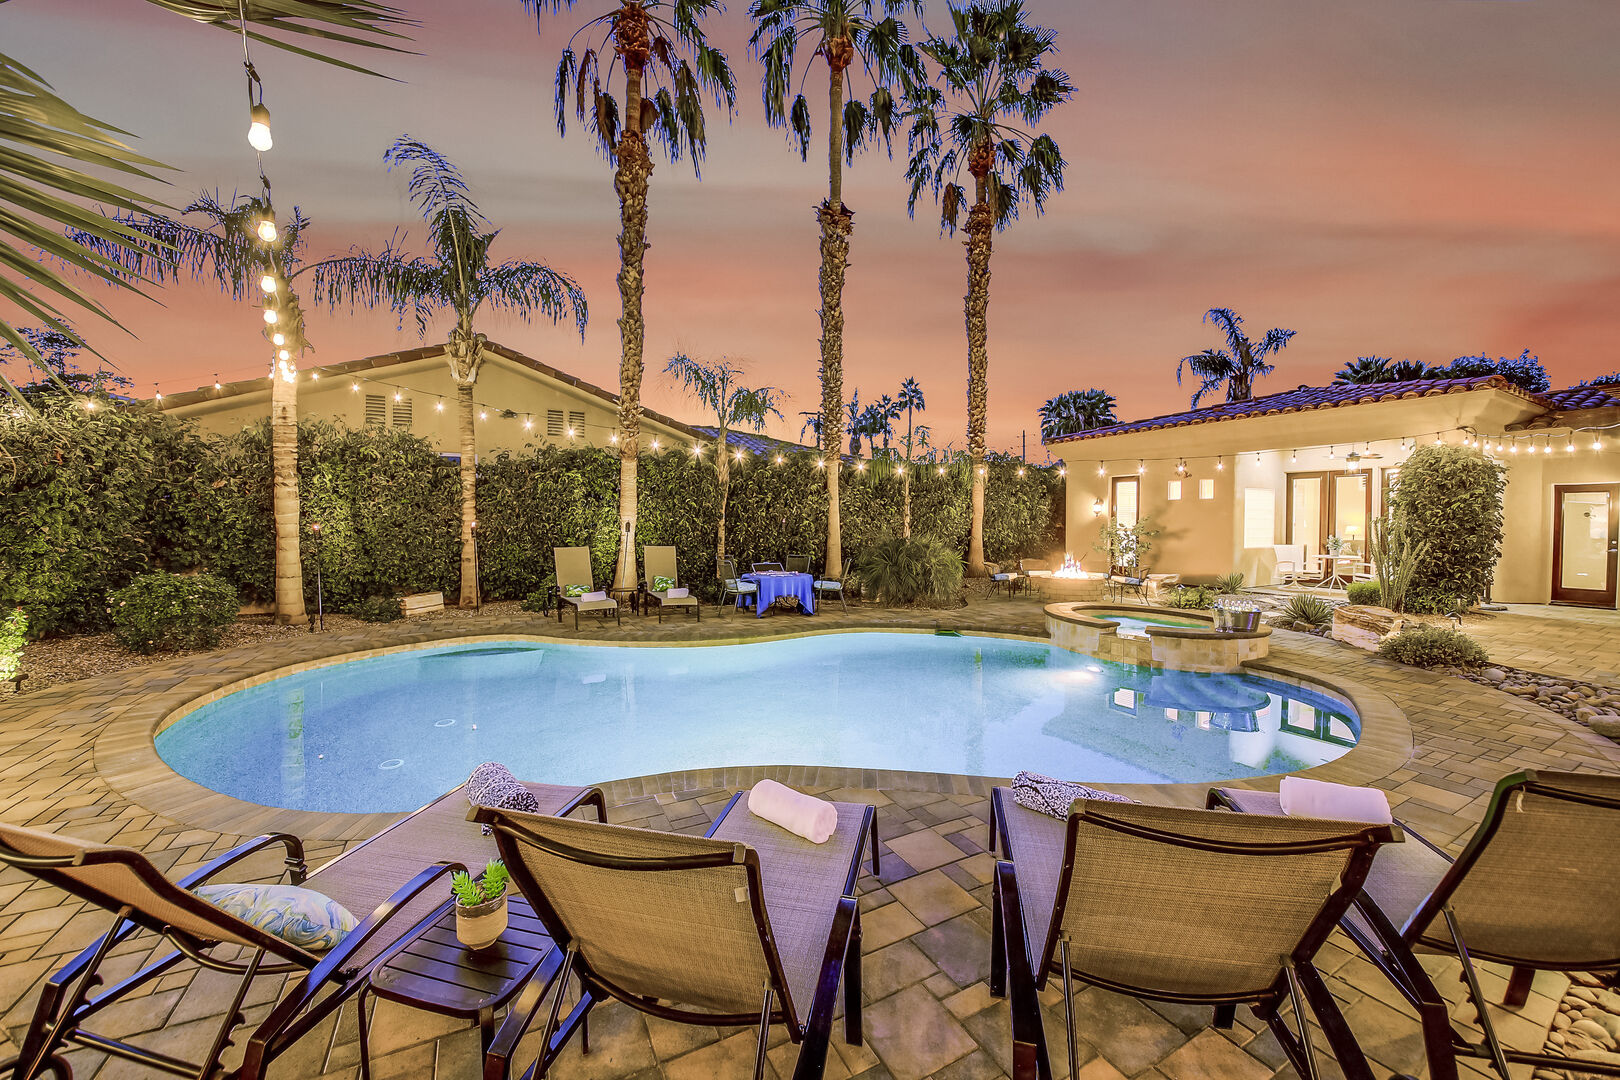 Kick back in the private fully secluded courtyard complete with desert landscape.